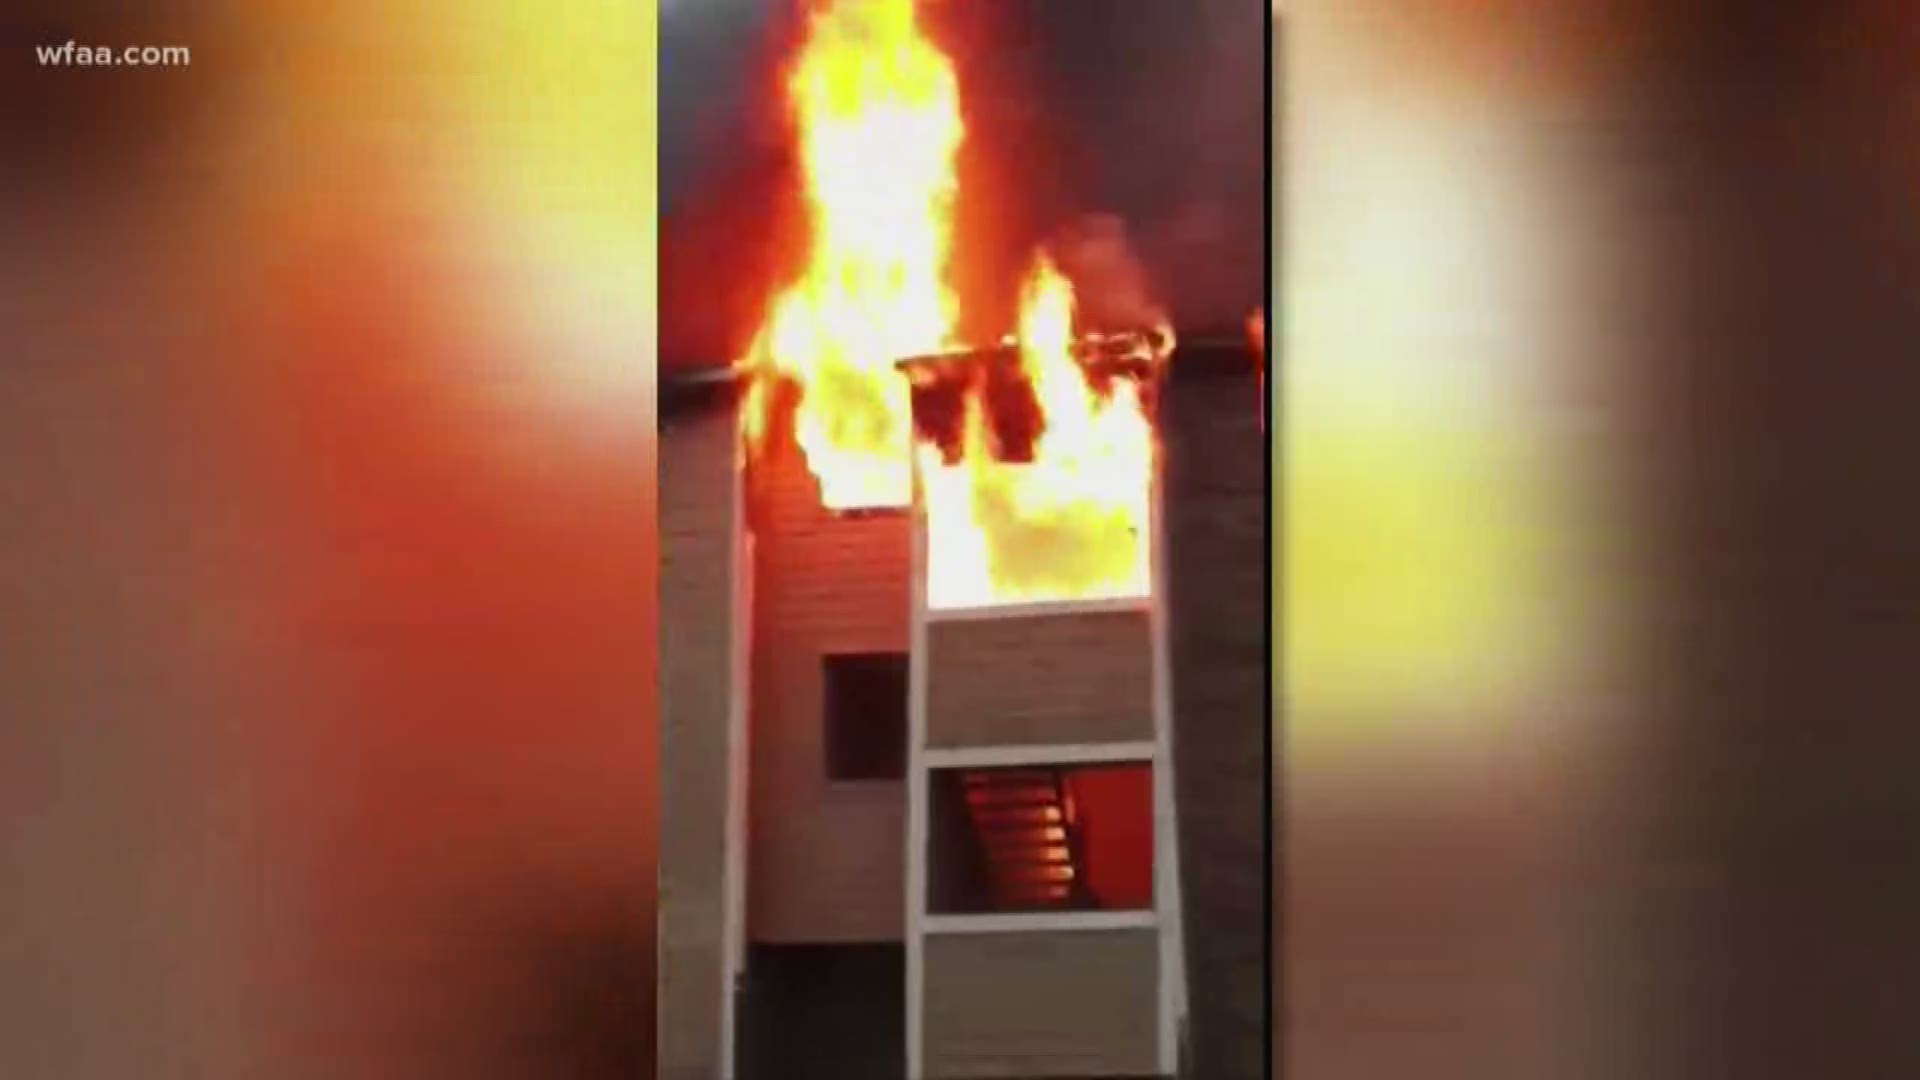 City blames code violations for fire